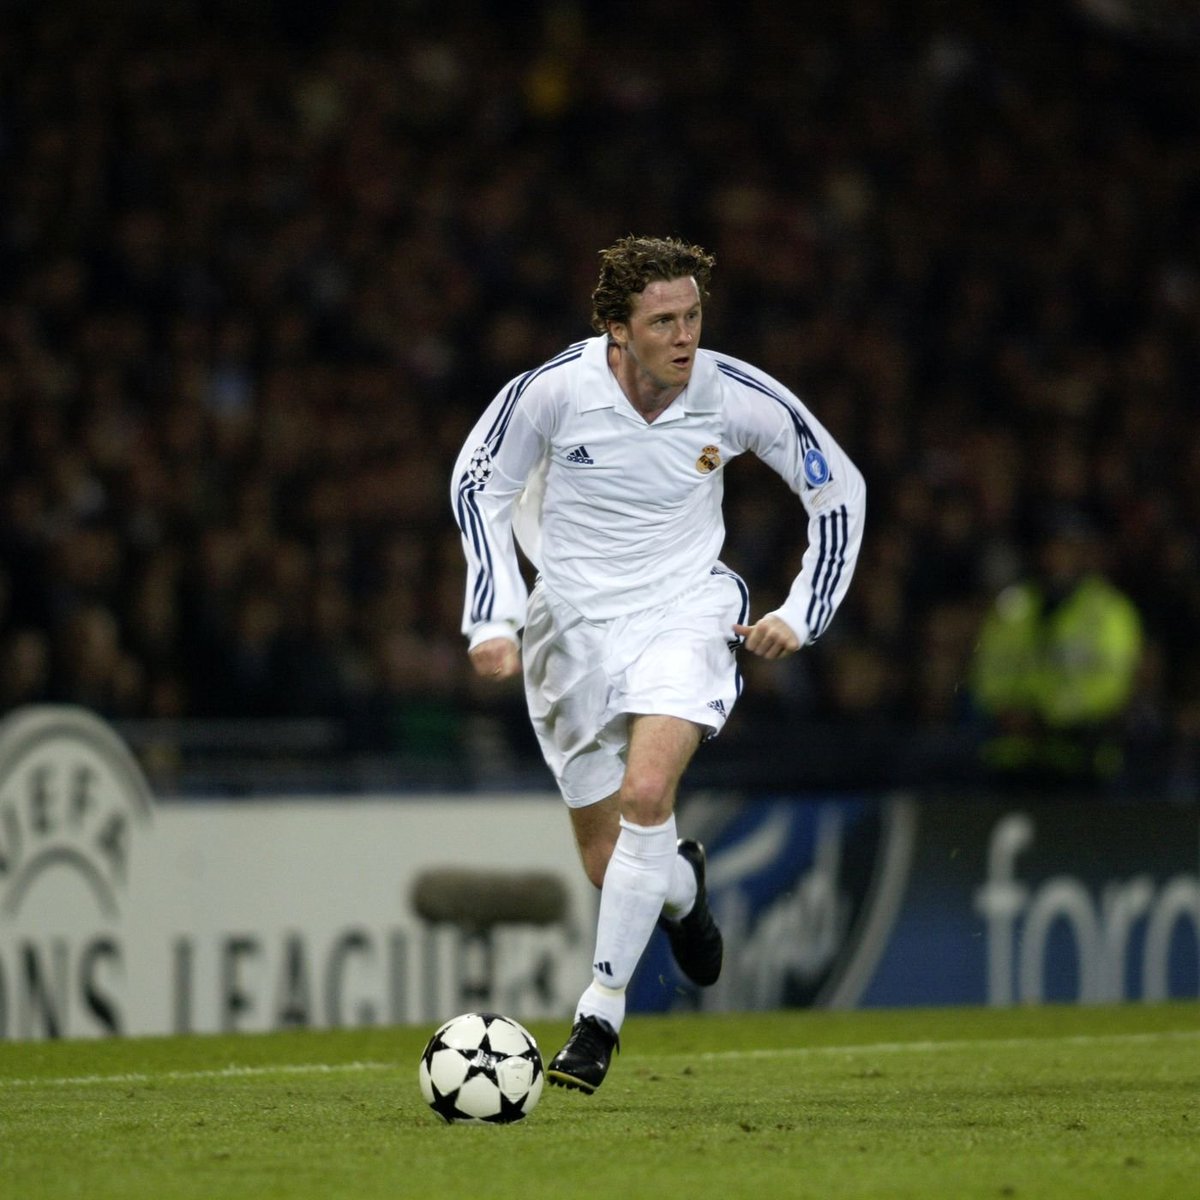 Jude Bellingham becomes the first Englishman to reach a Champions League Final with Real Madrid since Steve McManaman faced Bayer Leverkusen in 2002 at Hampden Park. Over two decades ago... ⚪️🏴󠁧󠁢󠁥󠁮󠁧󠁿